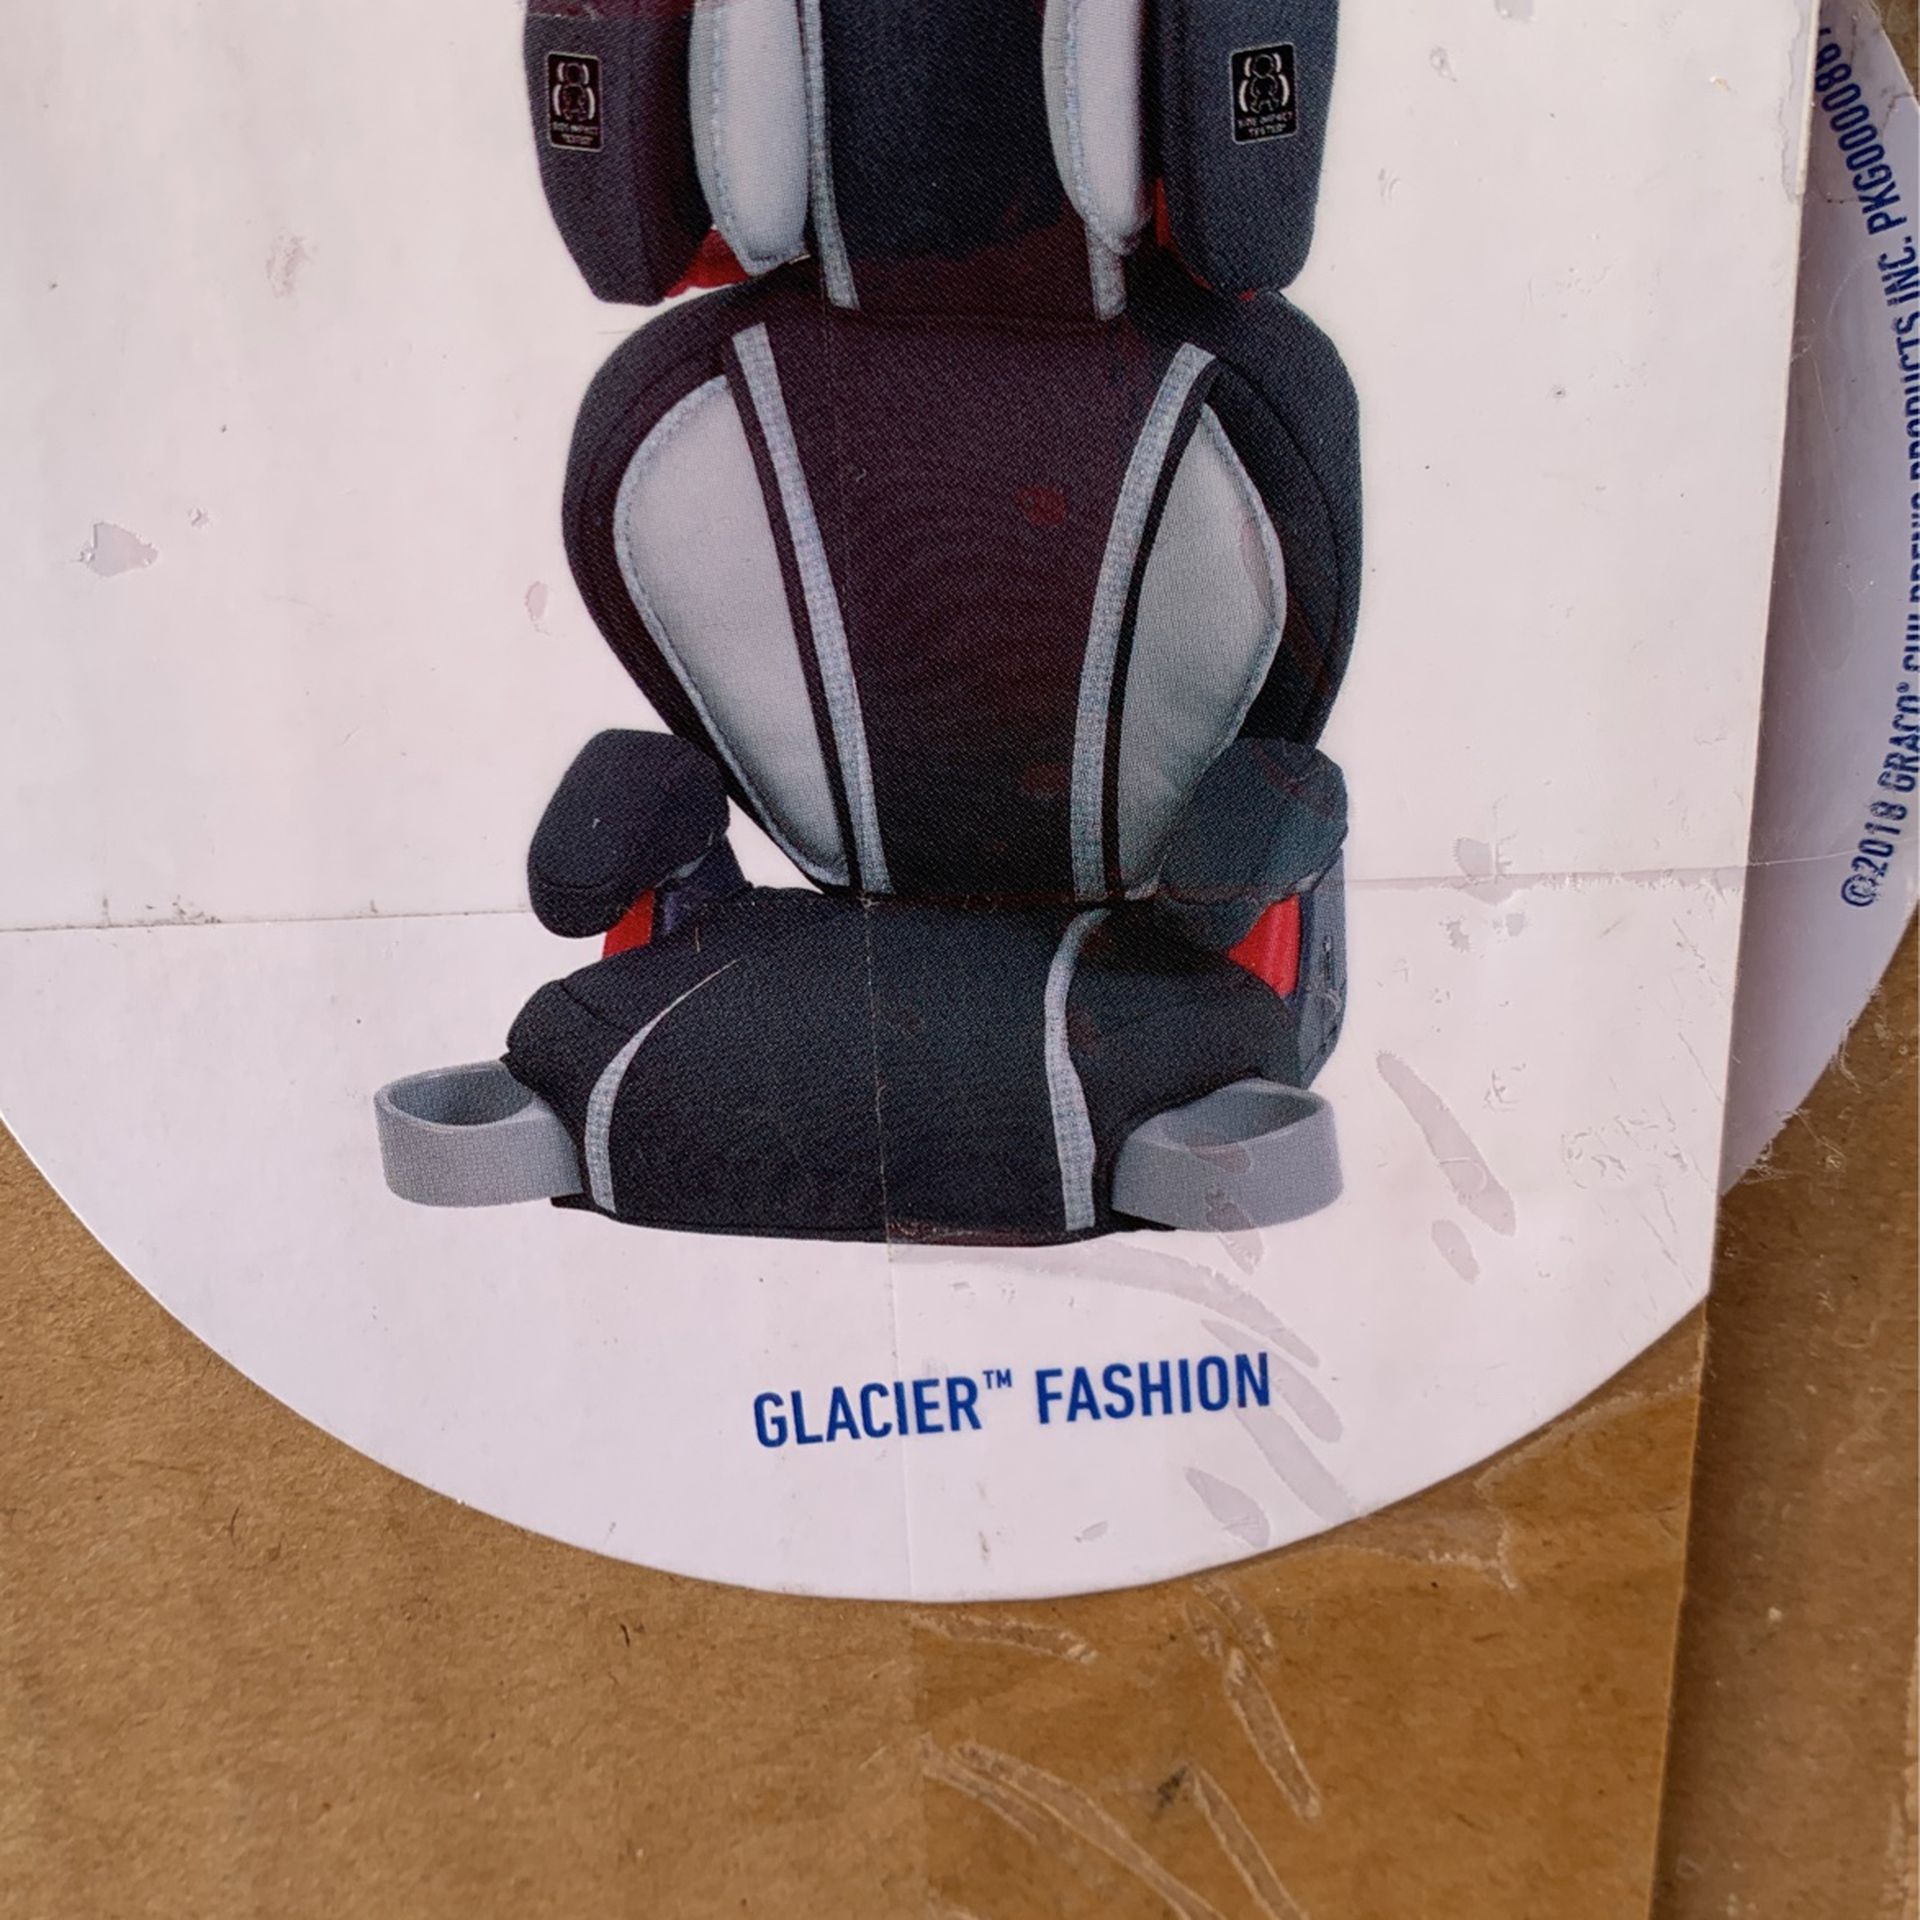 Graco Turbobooster Highback Booster Seat BRAND NEW IN BOX. NEVER USED